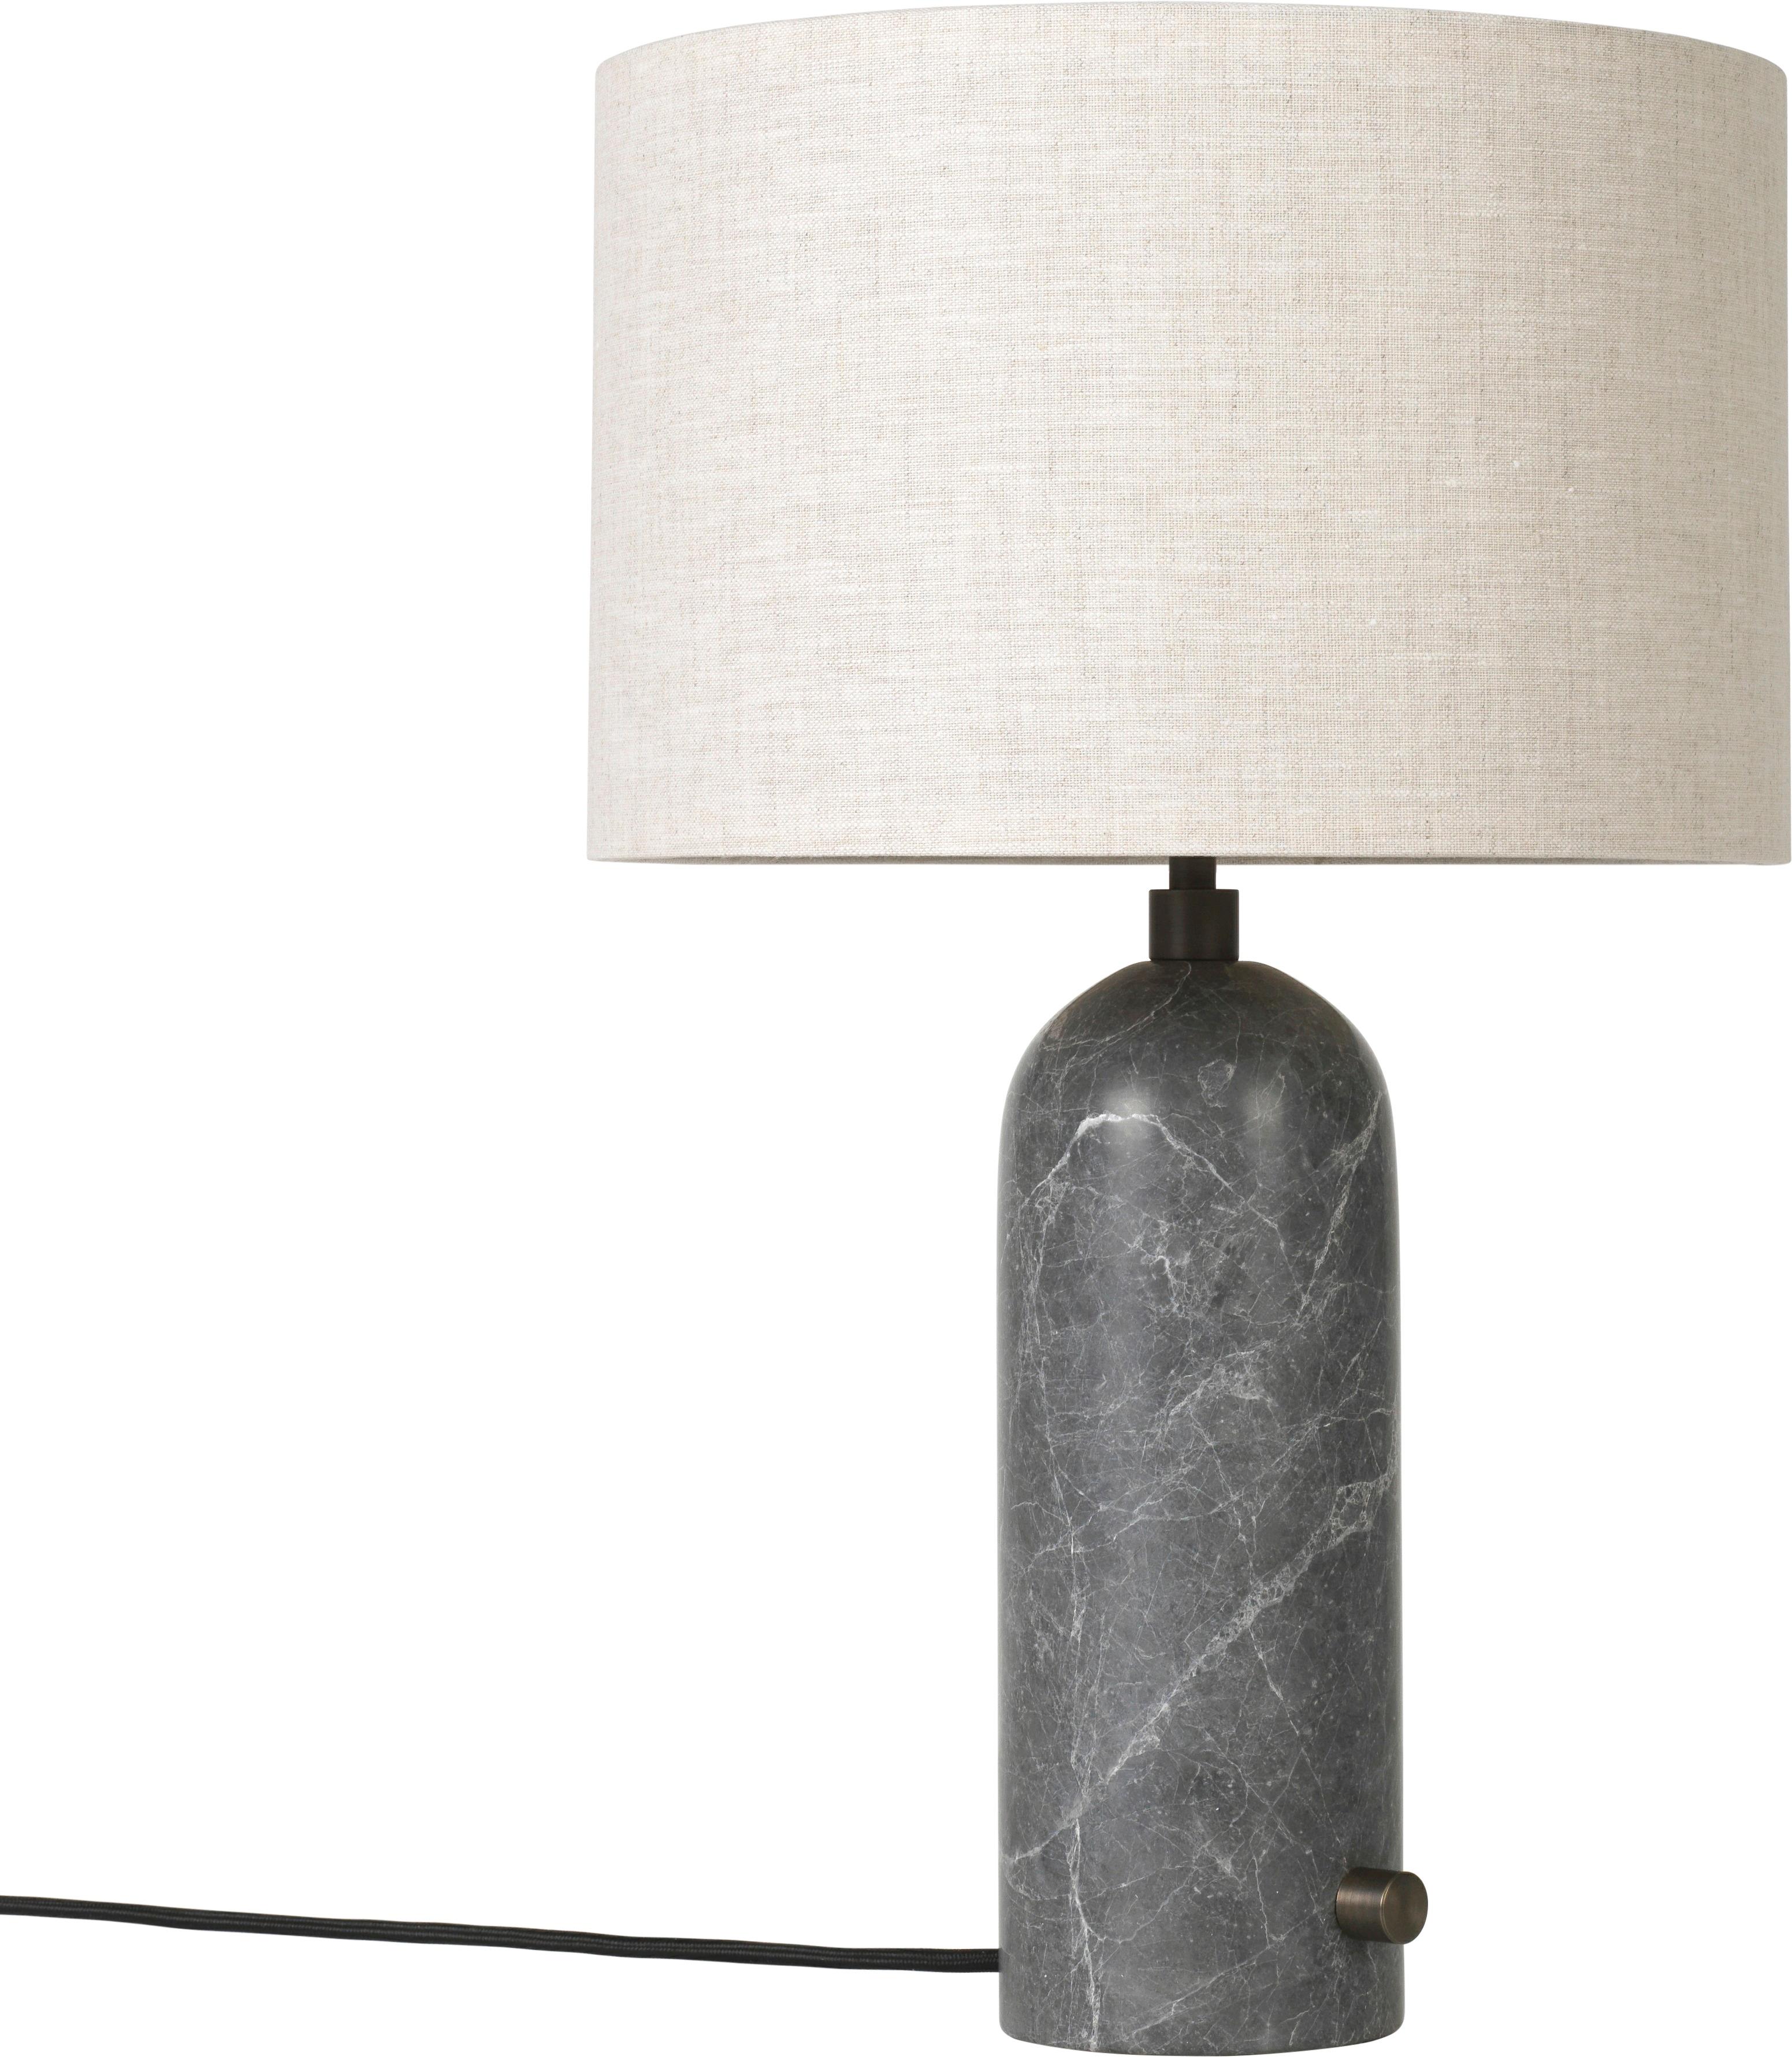 Small 'Gravity' marble table lamp by Space Copenhagen for Gubi in grey.

Executed in solid marble with a canvas or white textile shade perched atop its stem, the Gravity table lamp designed by Space Copenhagen for GUBI contrasts strength and